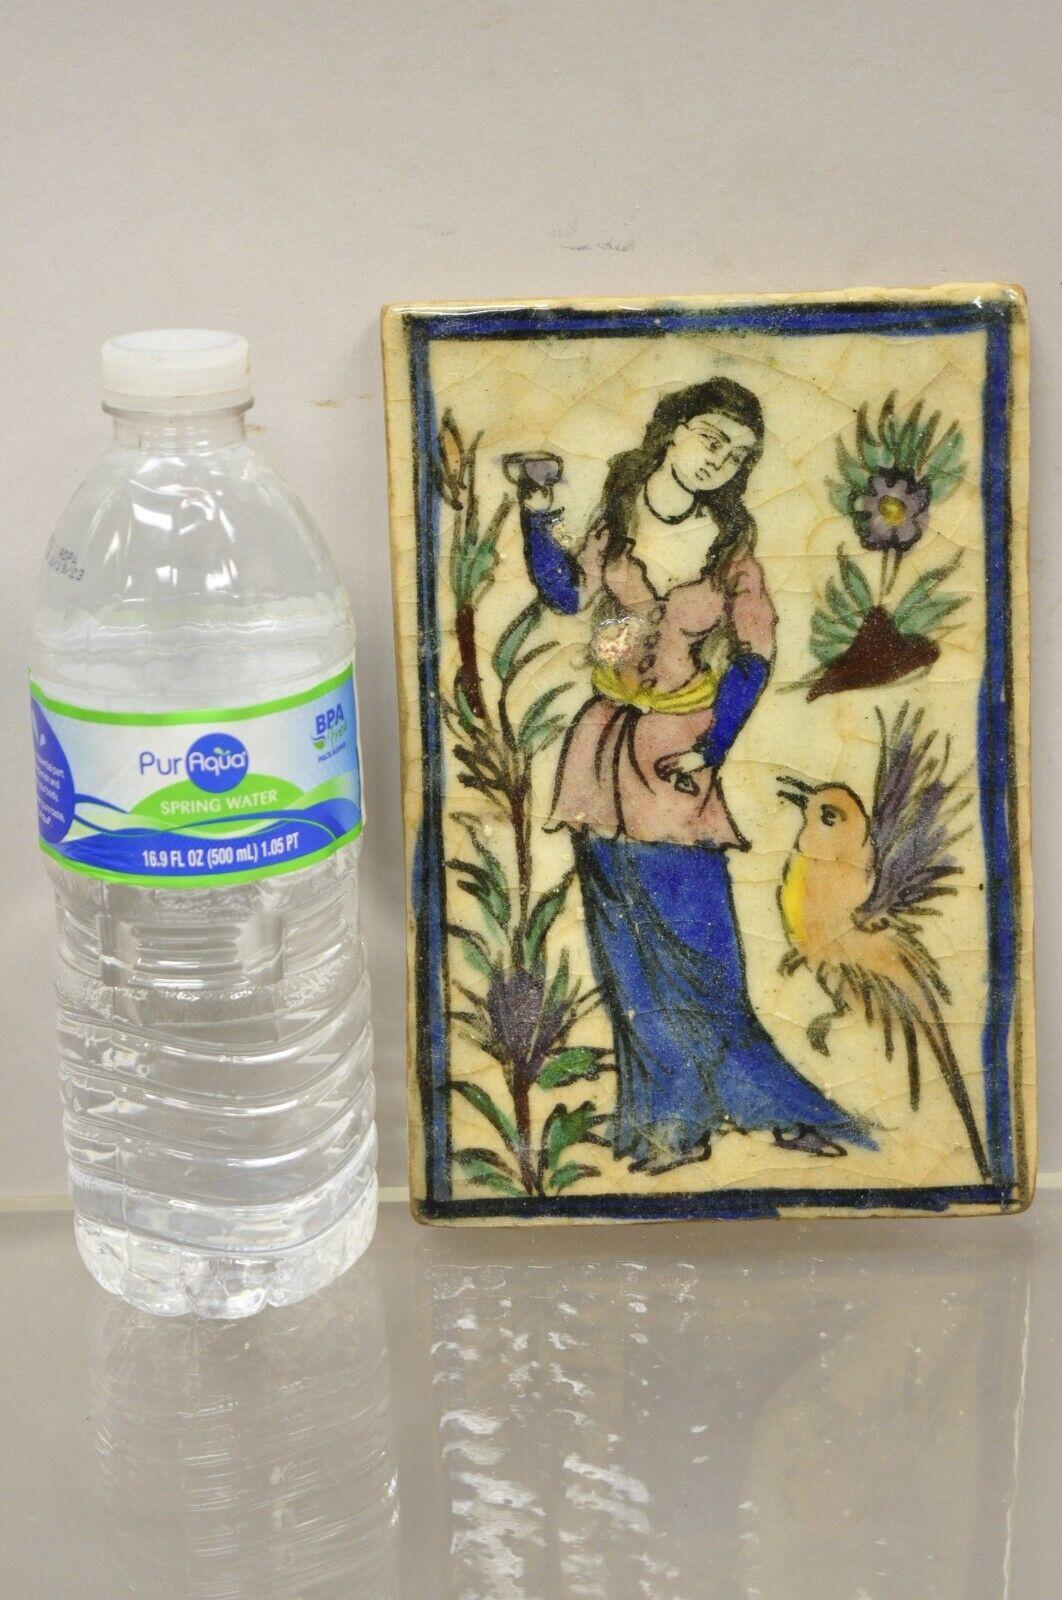 Antique Persian Iznik Qajar Style Ceramic Pottery Tile Woman and Bird C5. Original crackle glazed finish, heavy ceramic pottery construction, very impressive detail, wonderful style and form. Great to mount as wall art or accent tiles for special